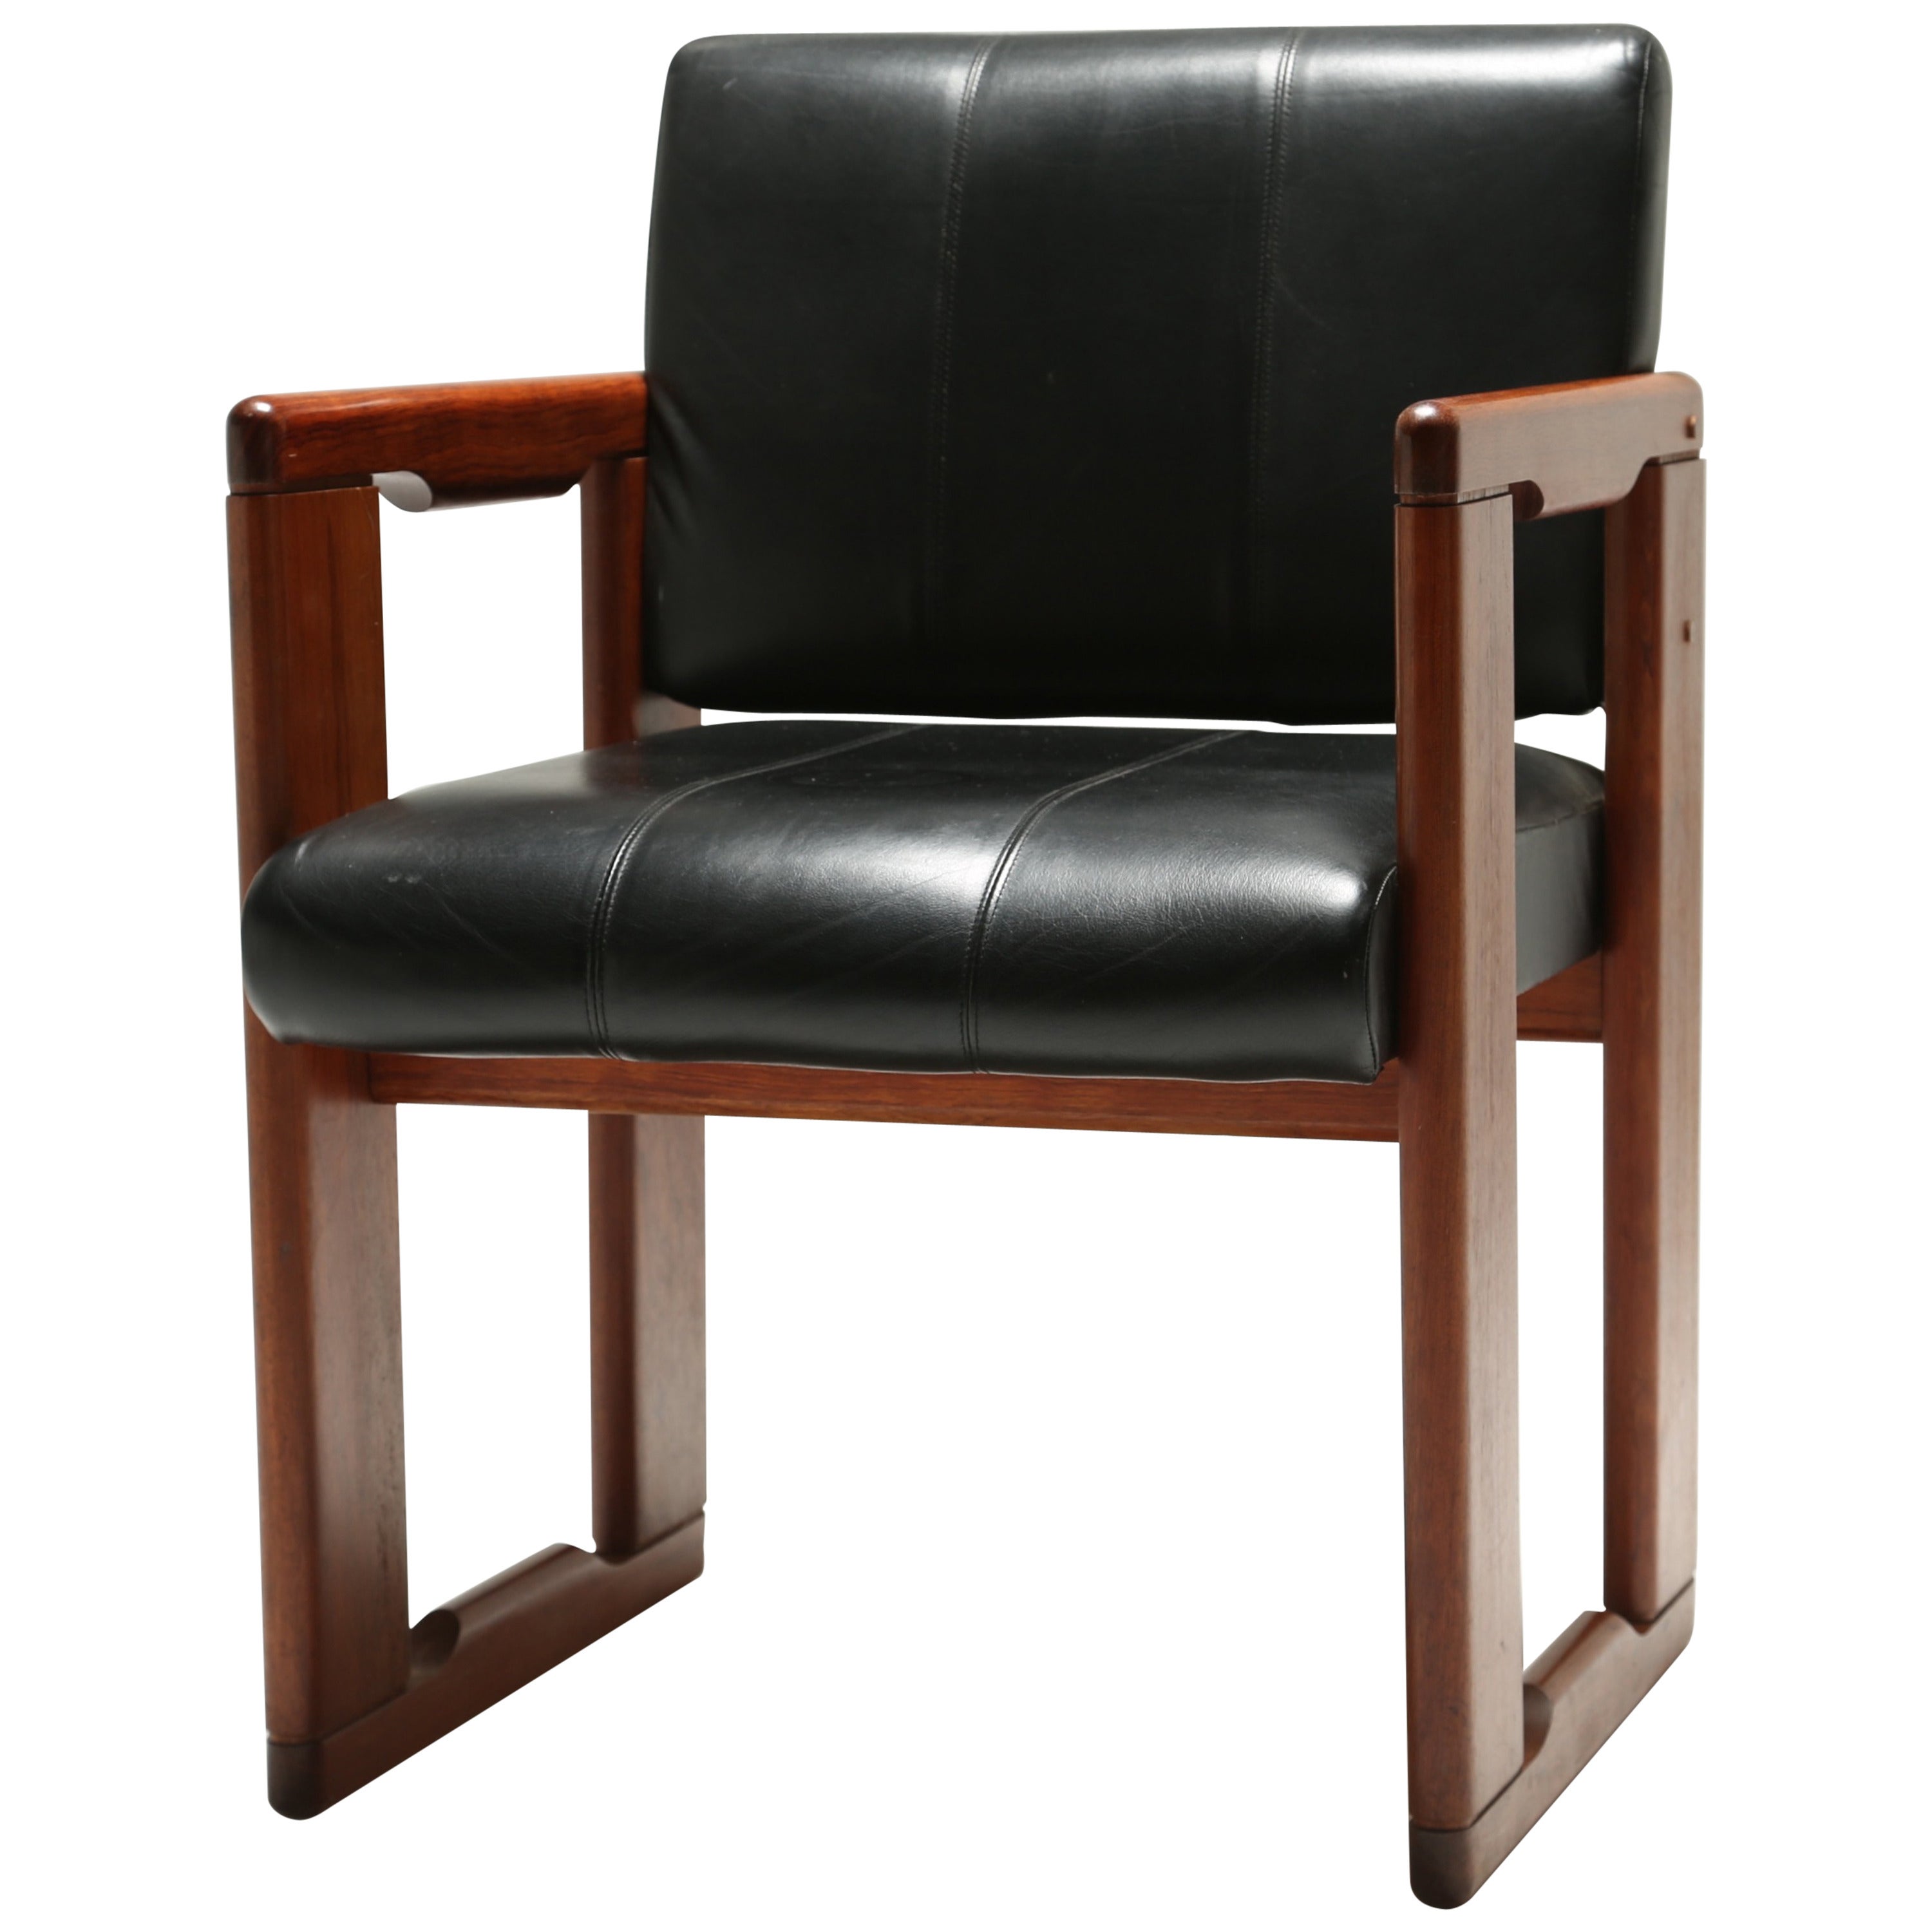 Tobia Scarpa Dialogo armchair with leather seat. For Sale